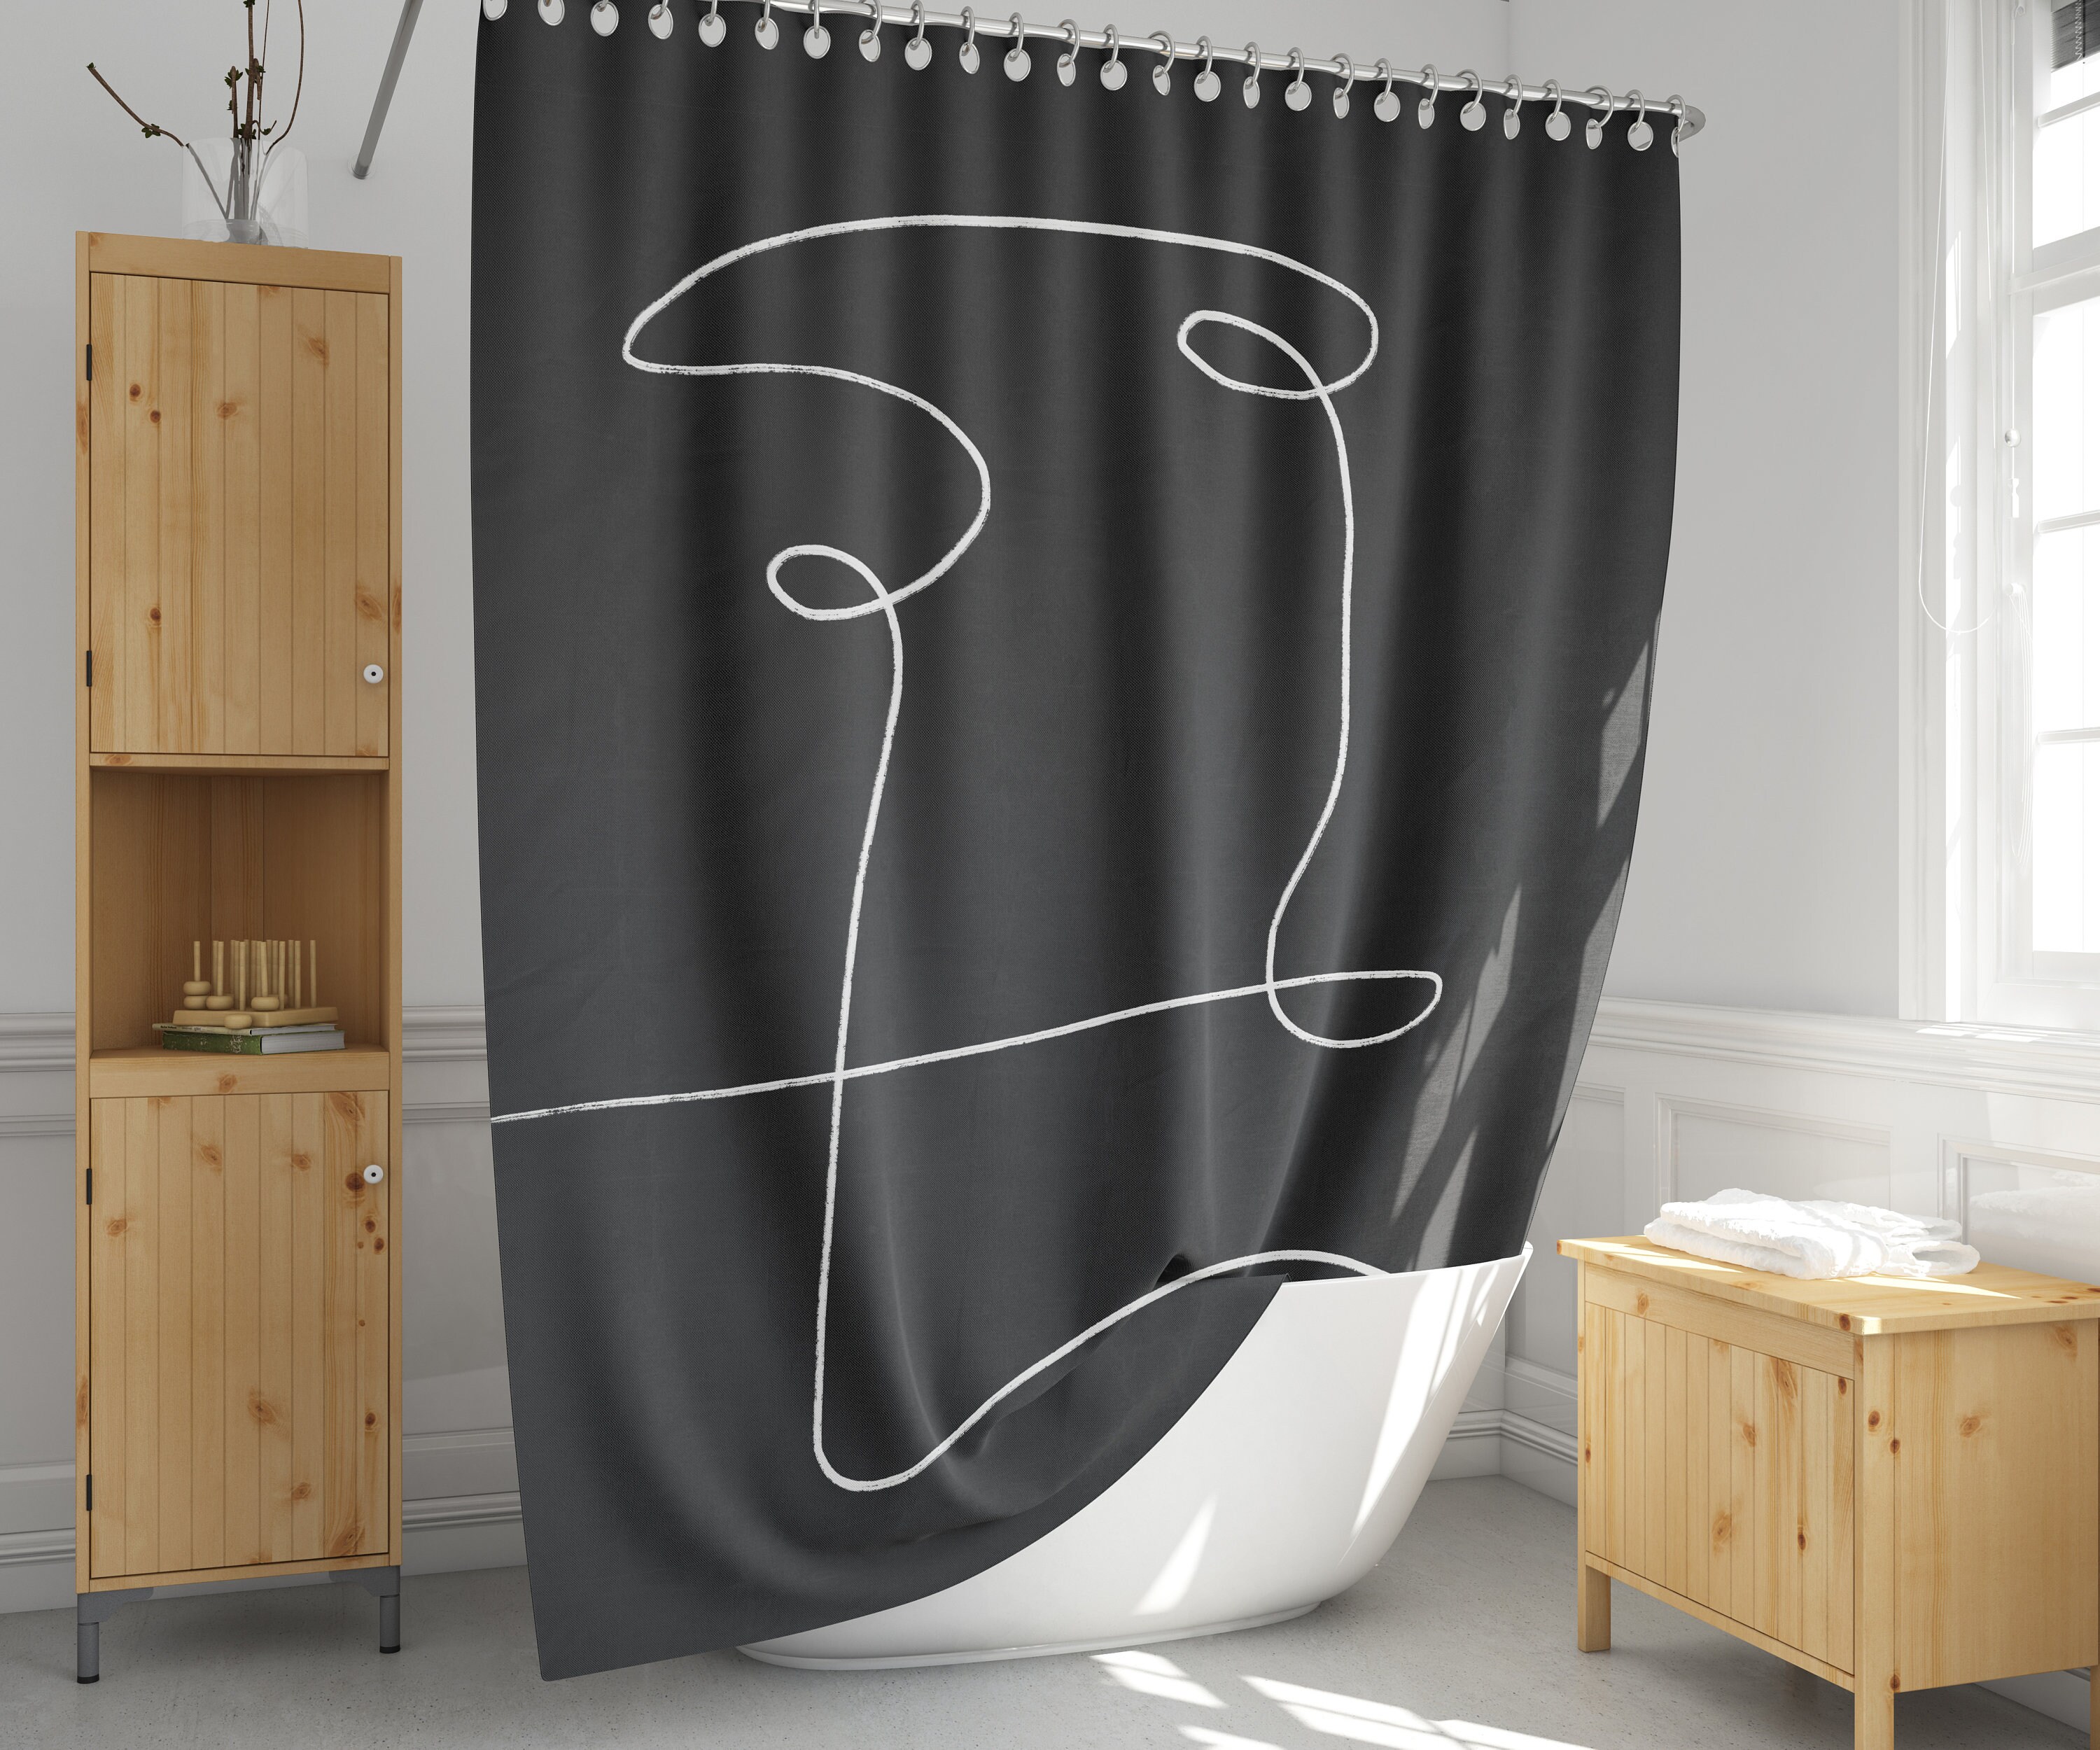 Black and White Shower Curtain Abstract Lines Print for Bathroom 